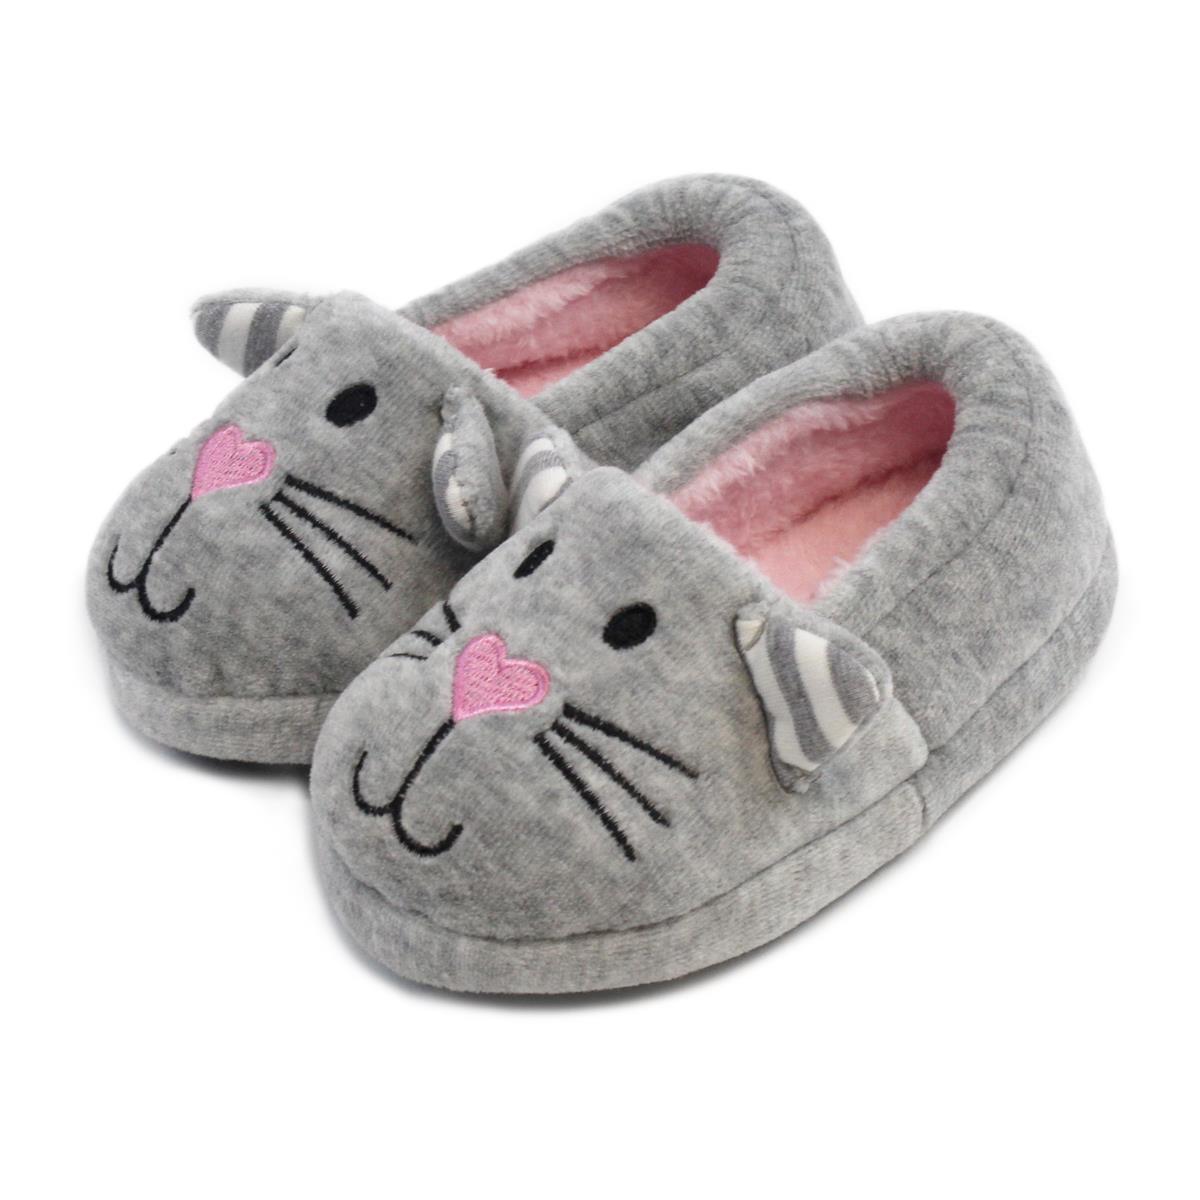 totes baby slippers